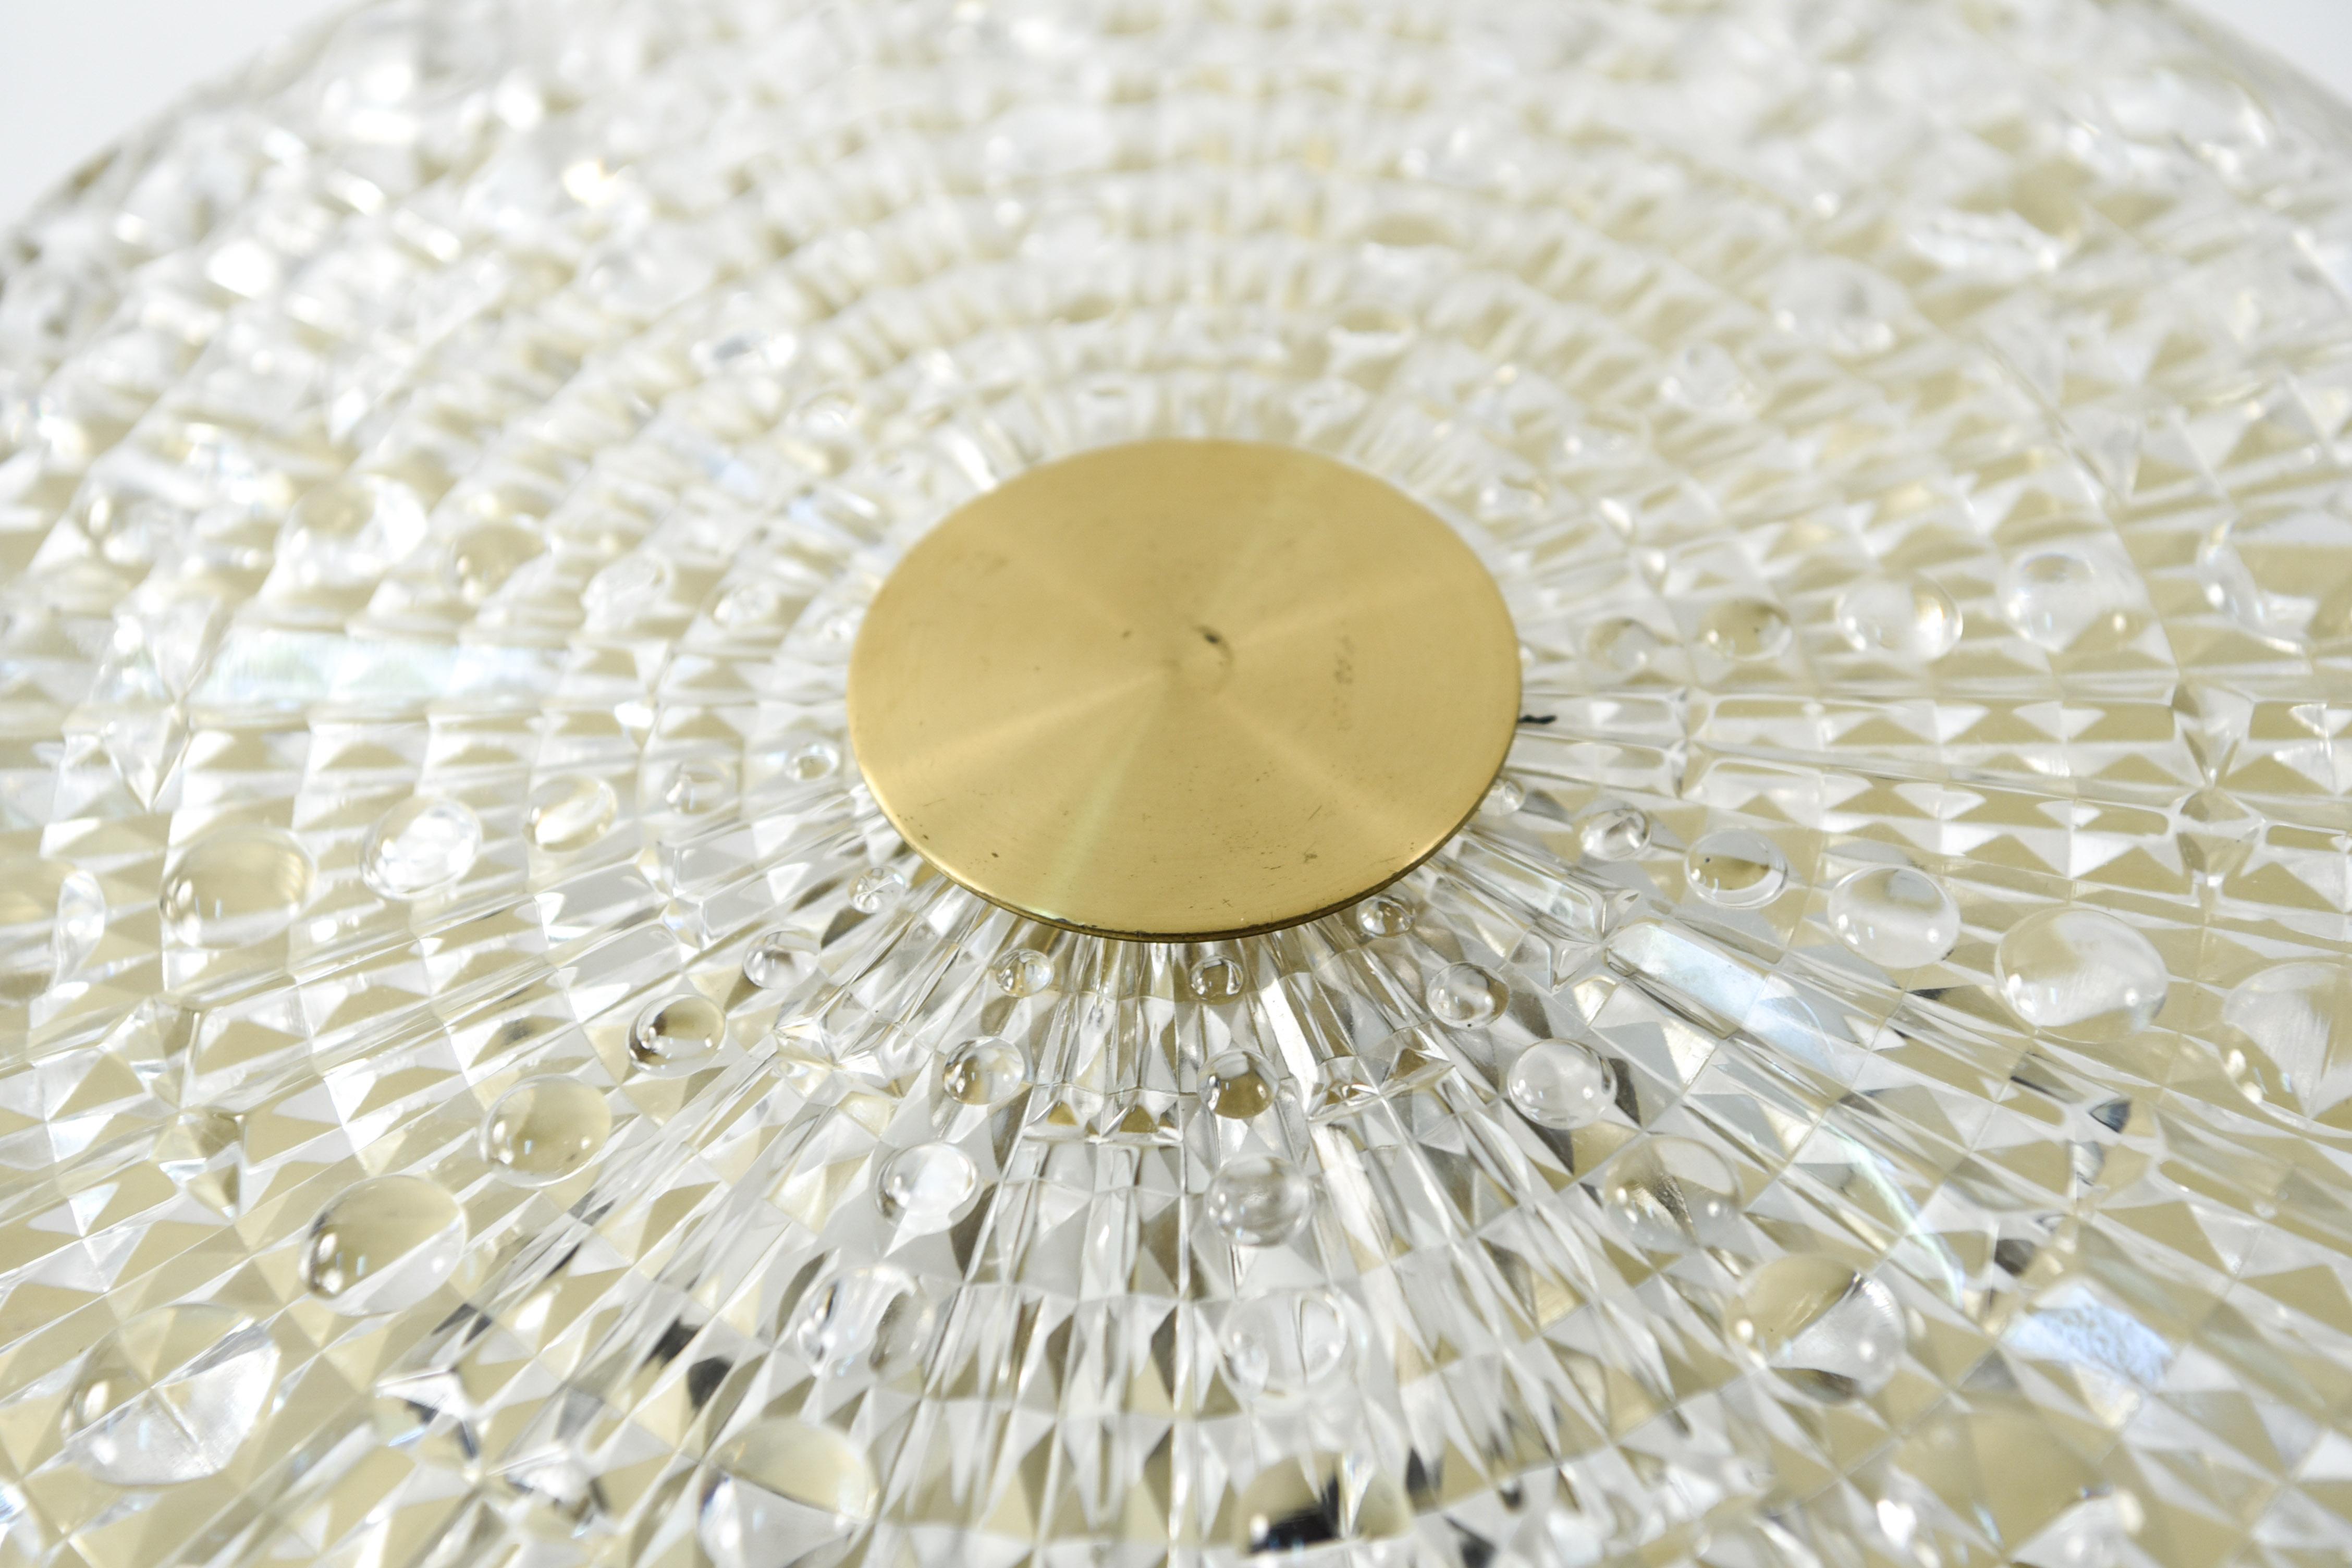 This Swedish midcentury pendant chandelier was designed by Carl Fagerlund and produced by Orrefors in the 1960s. This piece features a textured crystal body with brass hardware and is of a Classic form characteristic of Fagerlund's collaborations